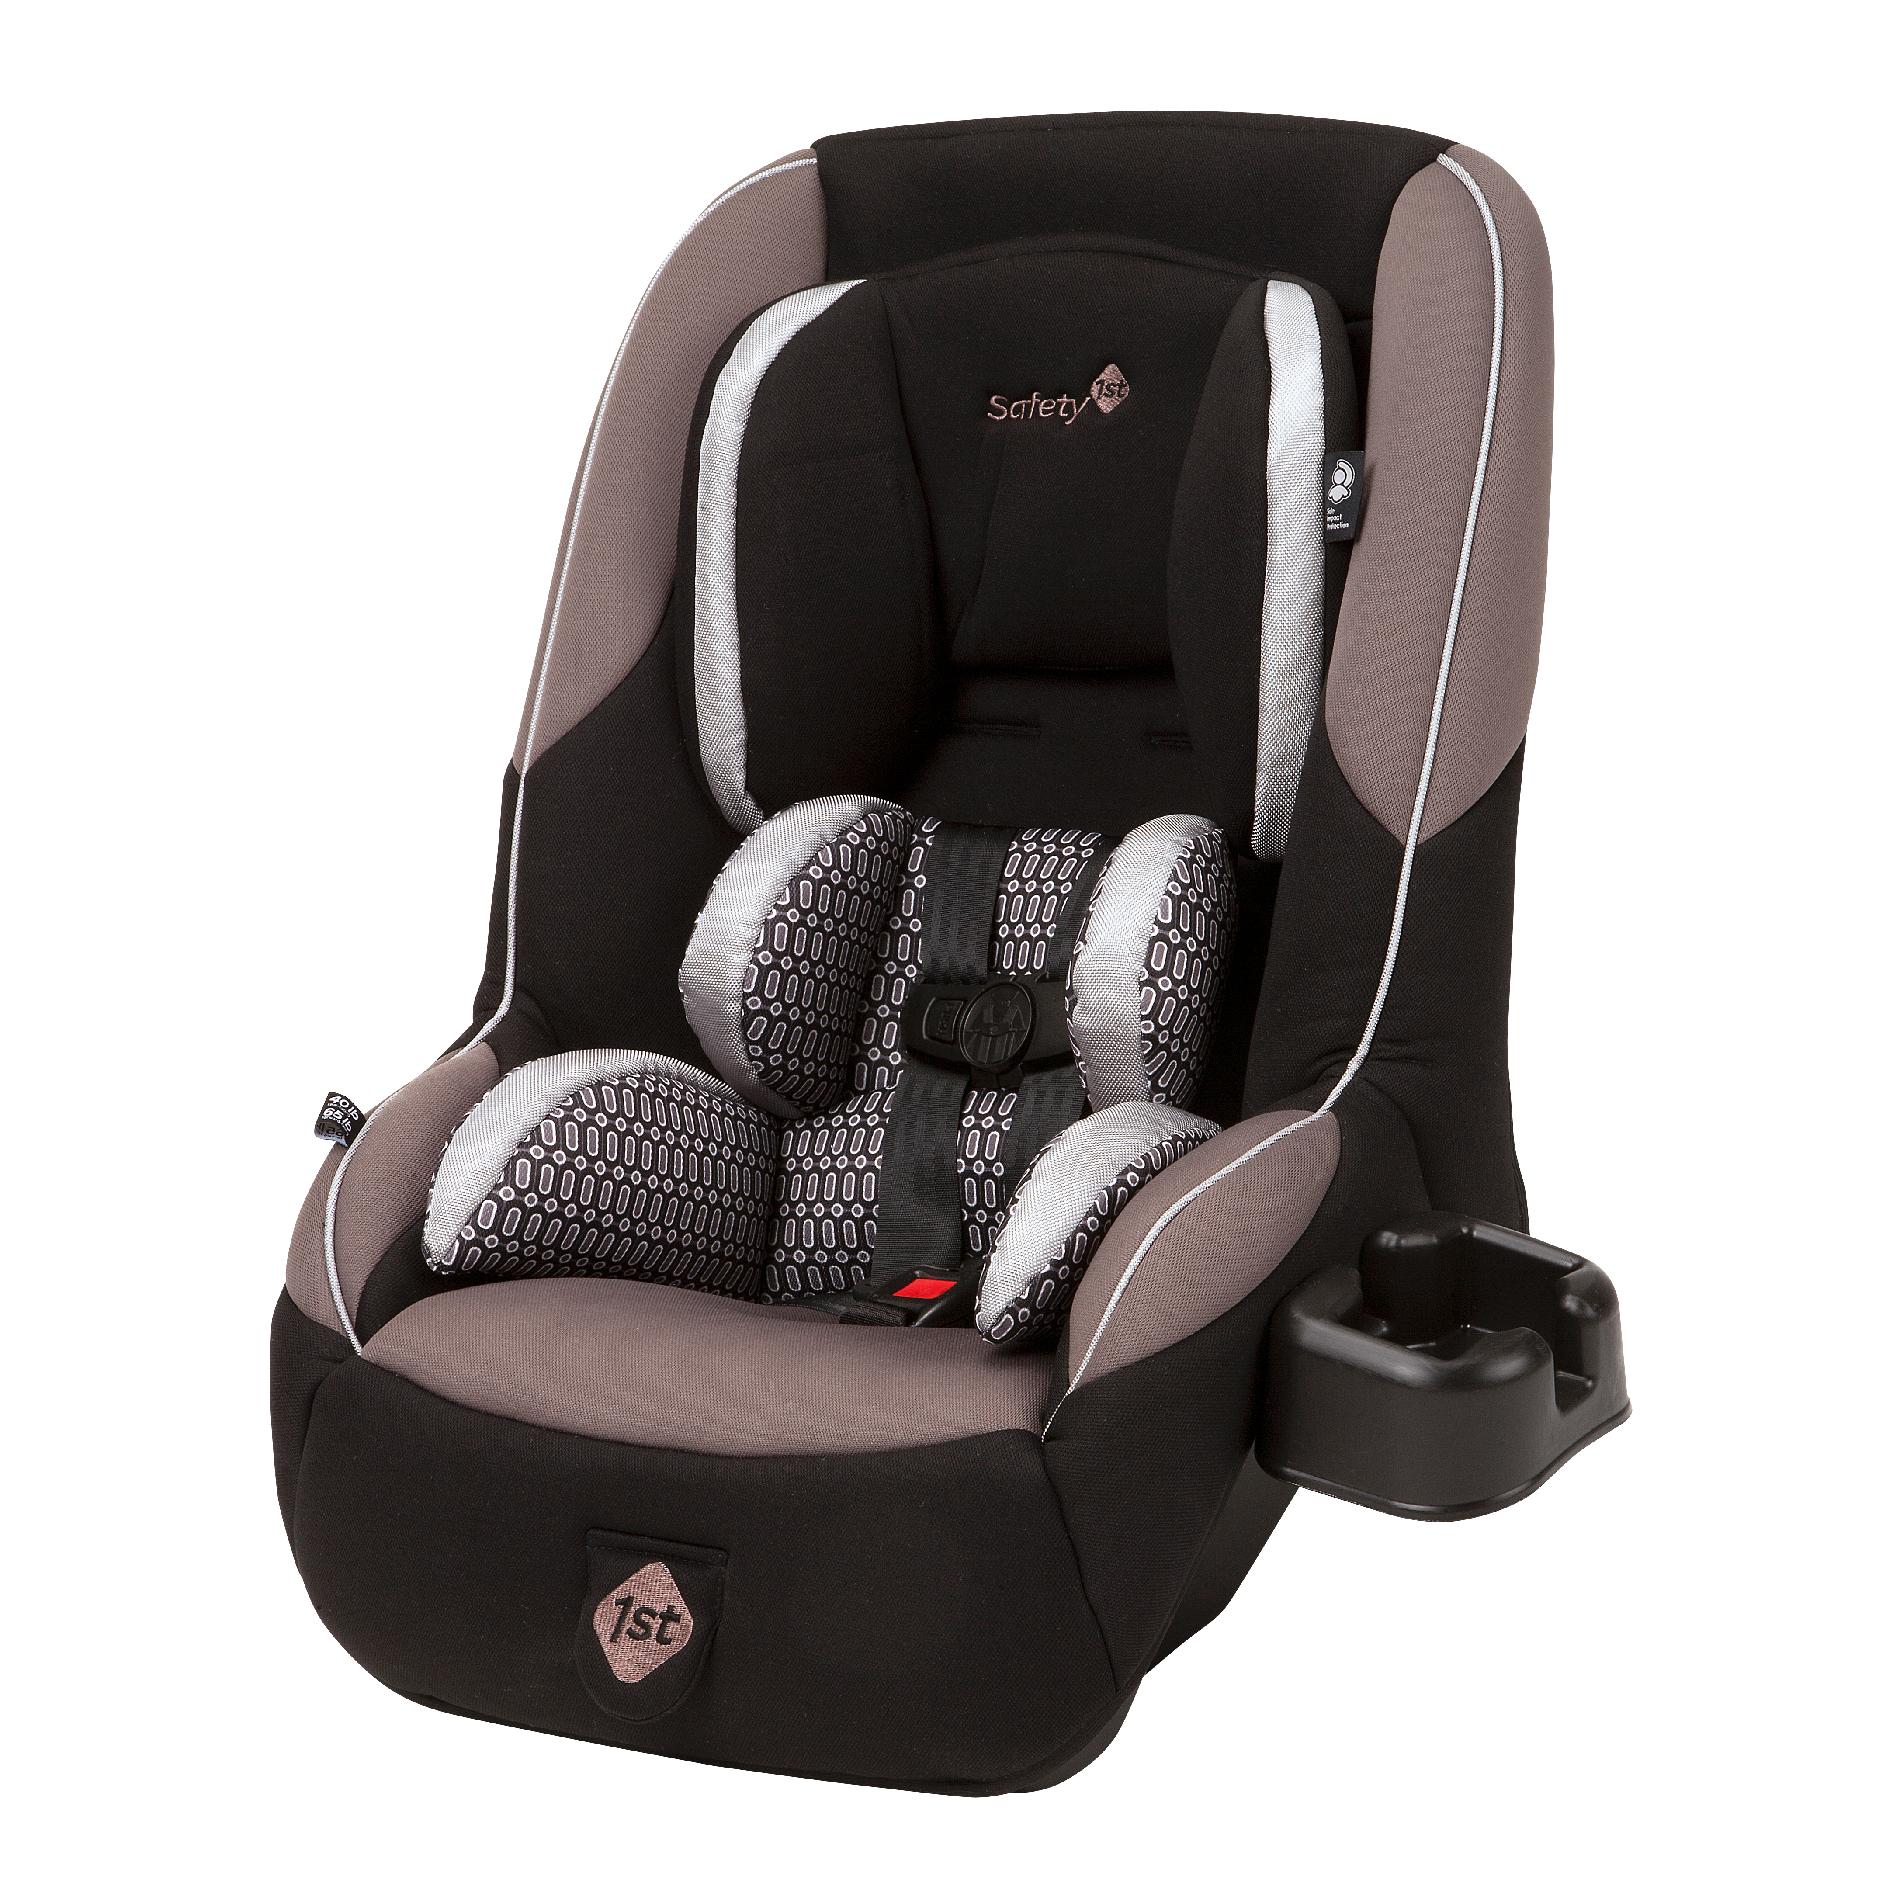 Safety 1st Guide 65 Convertible Car Seat - Chambers